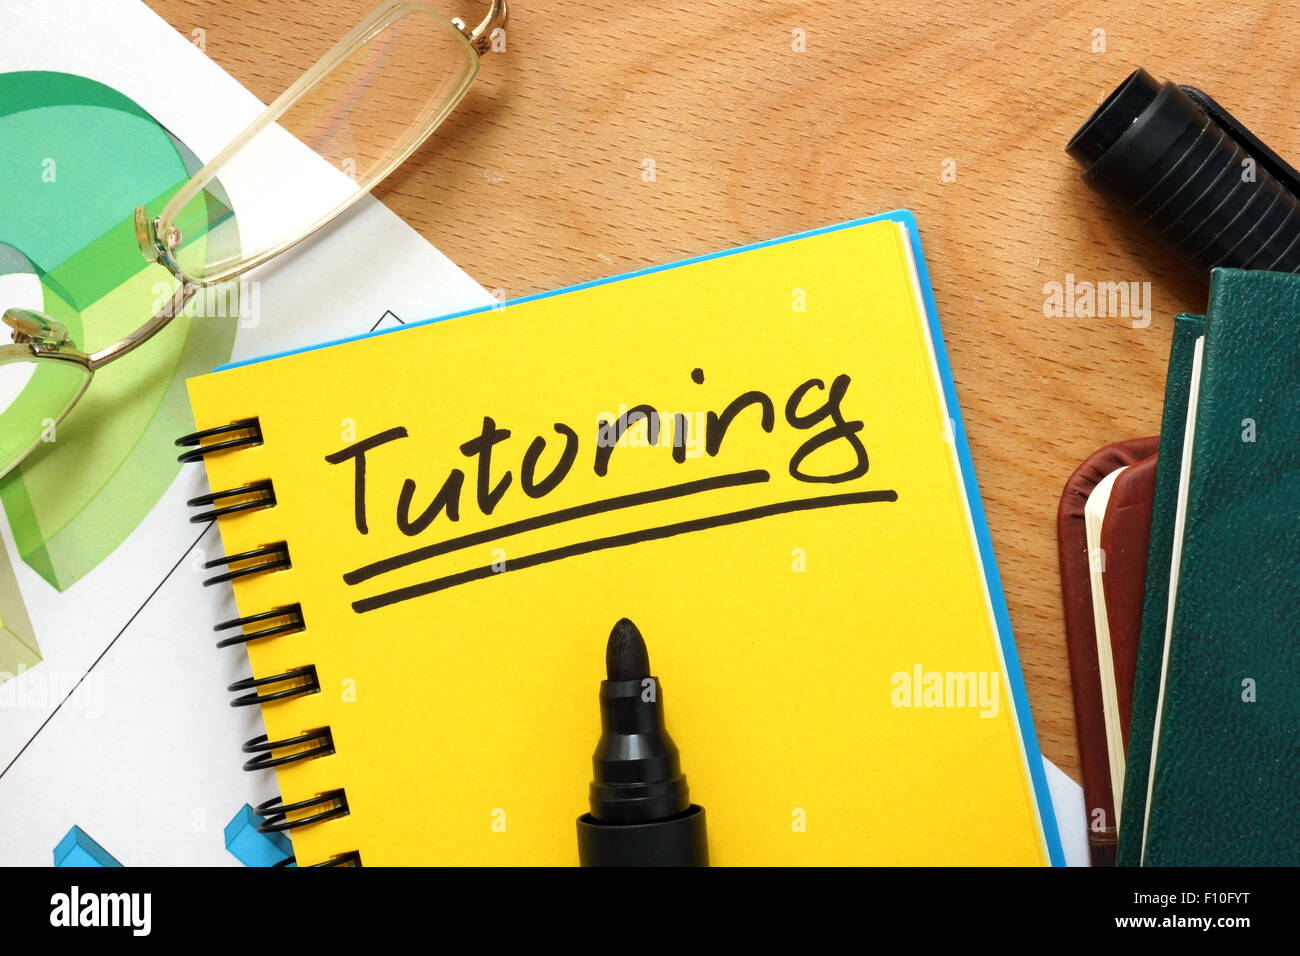 Notepad with tutoring on a wooden table. Stock Photo